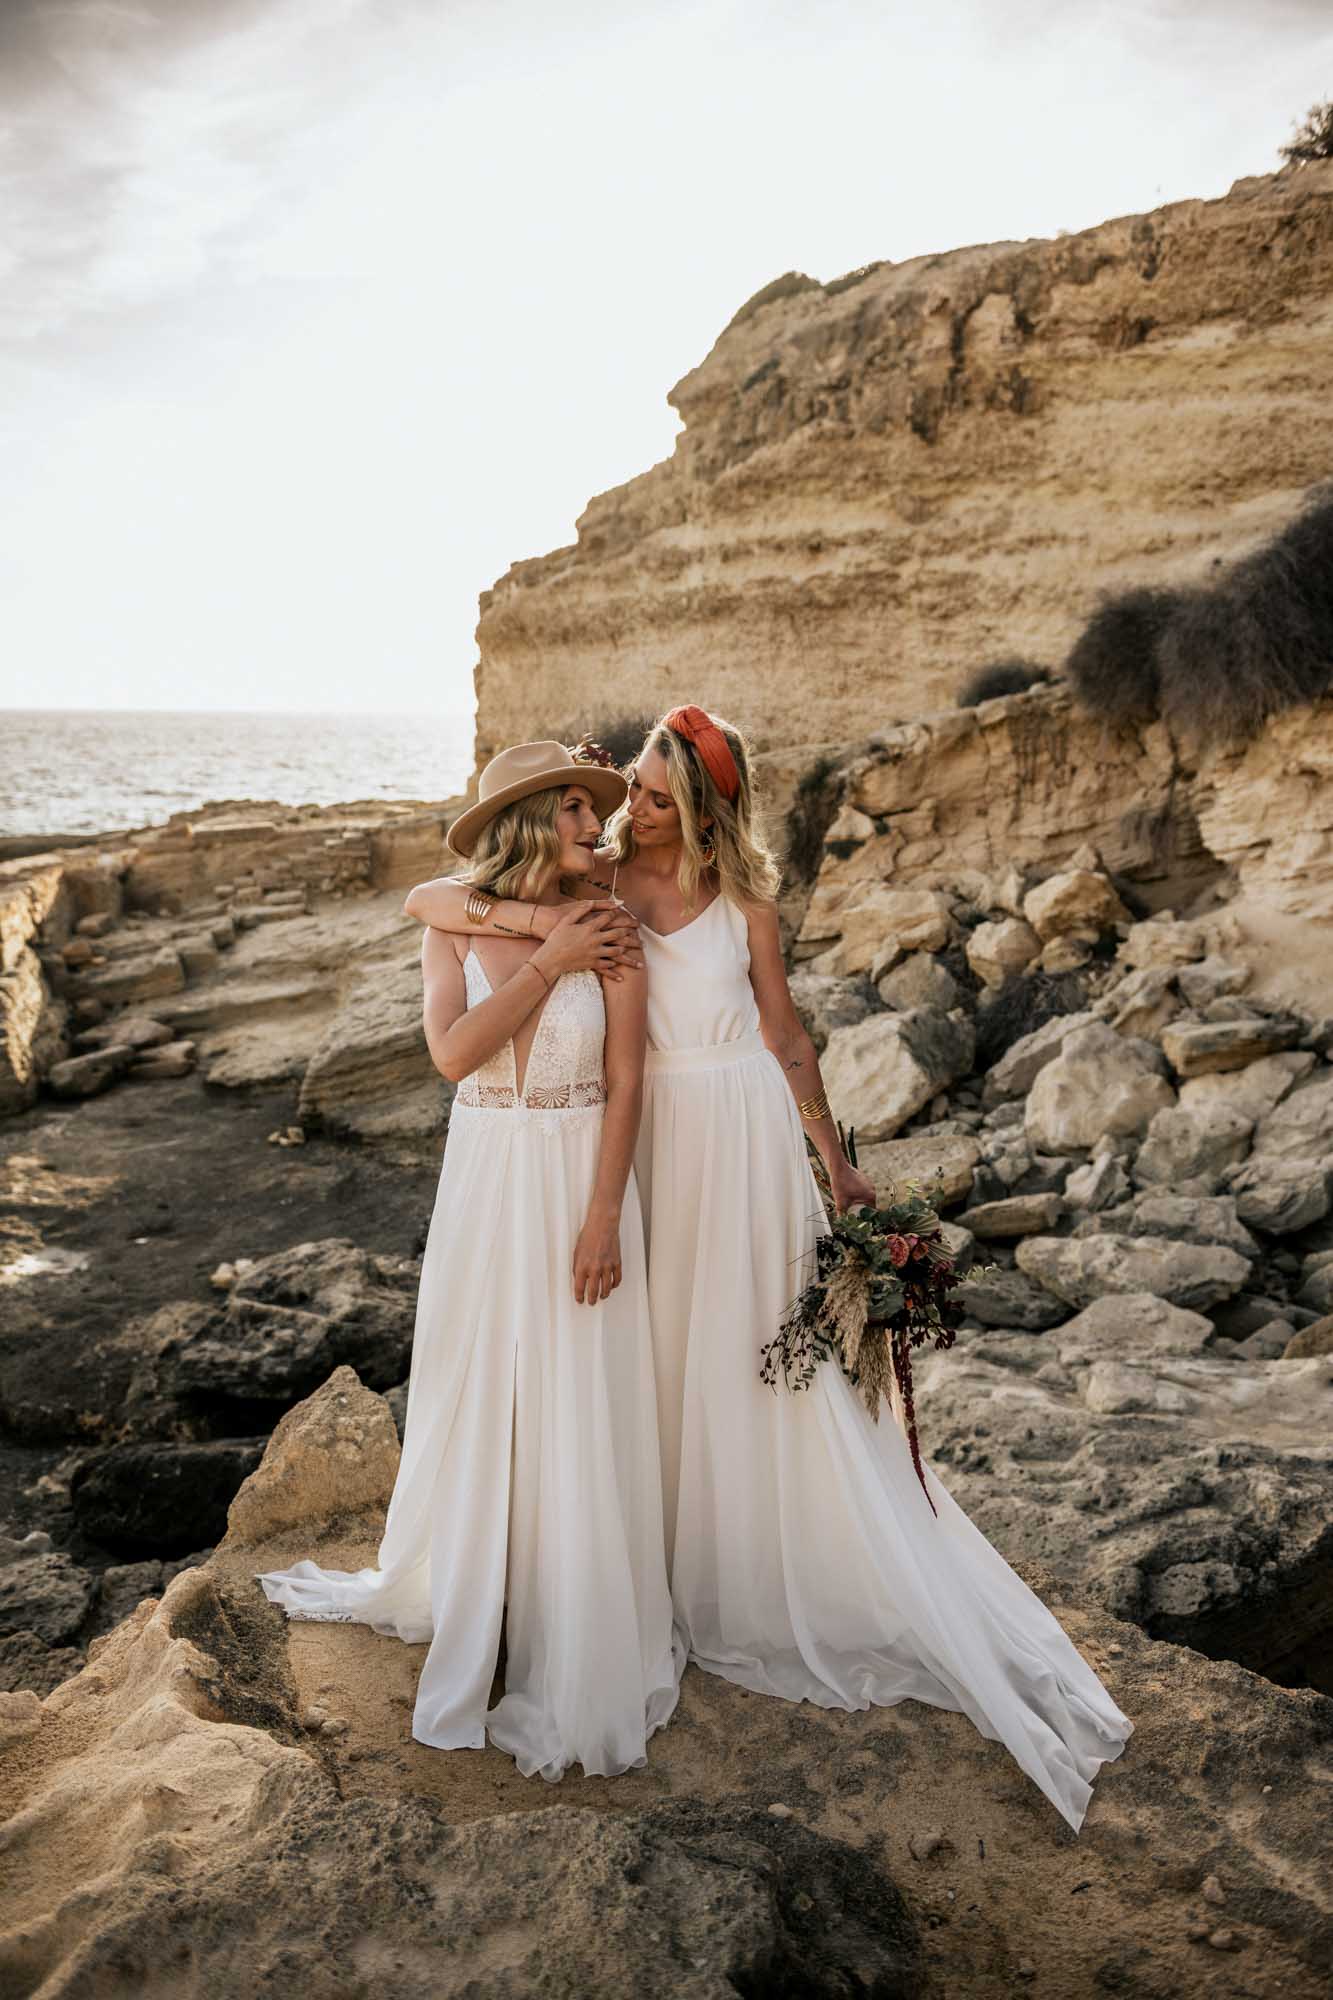 Epic surprise proposal during a styled shoot on the shores of Mallorca | Ilona Antina Photography | Featured on Equally Wed, the leading LGBTQ+ wedding magazine - black outfits